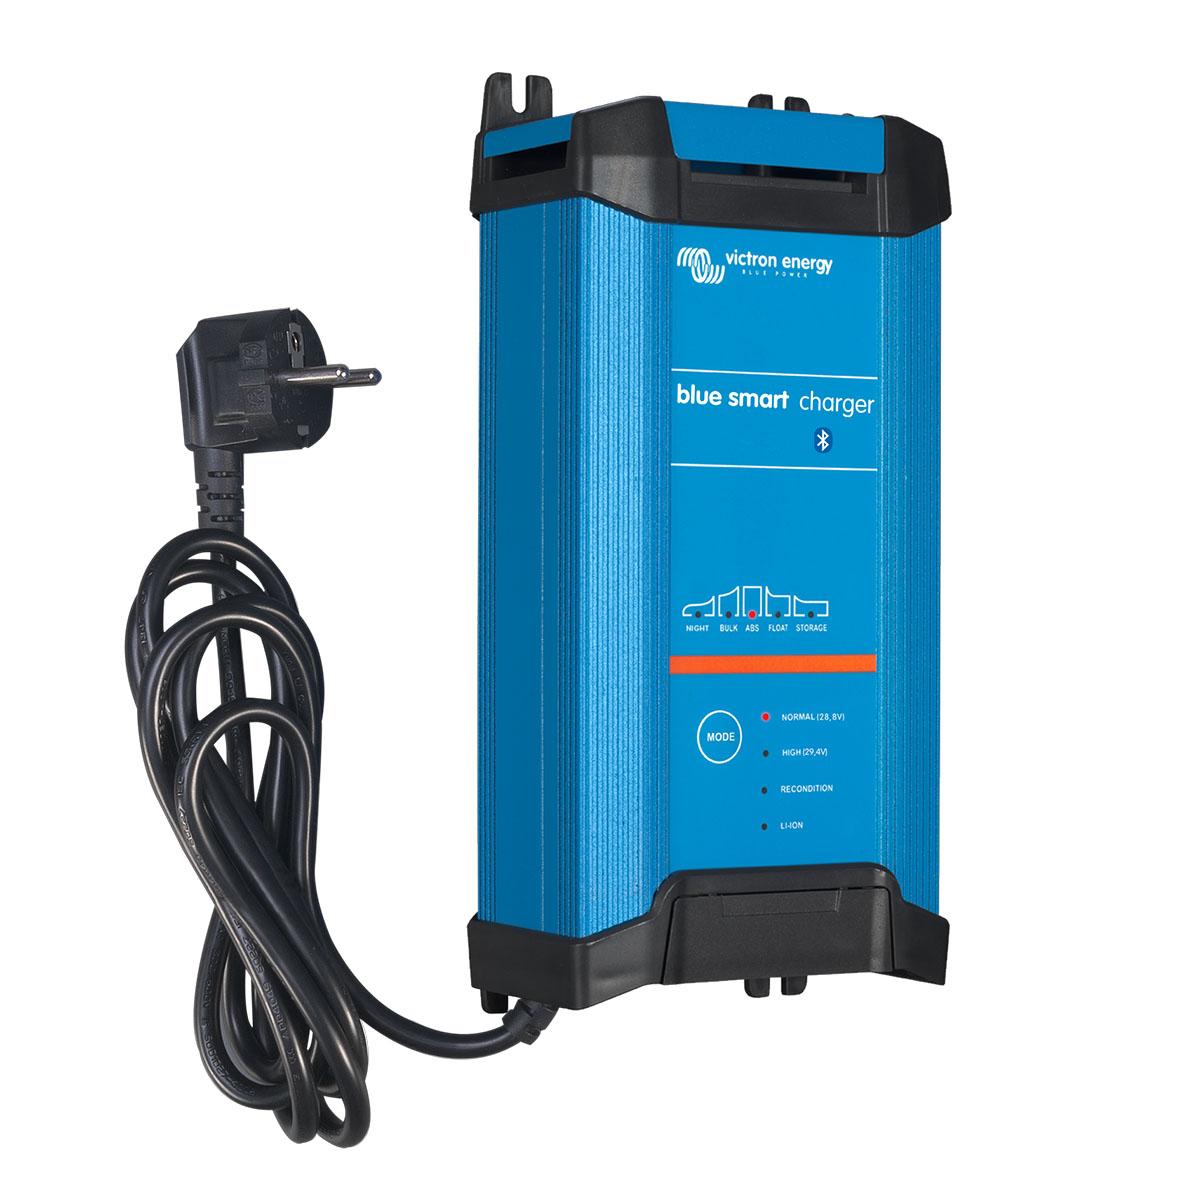 Victron Blue Smart IP22 Charger 24/8(1) 230V CEE 7/7 (USt-befreit nach §12 Abs.3 Nr. 1 S.1 UStG)